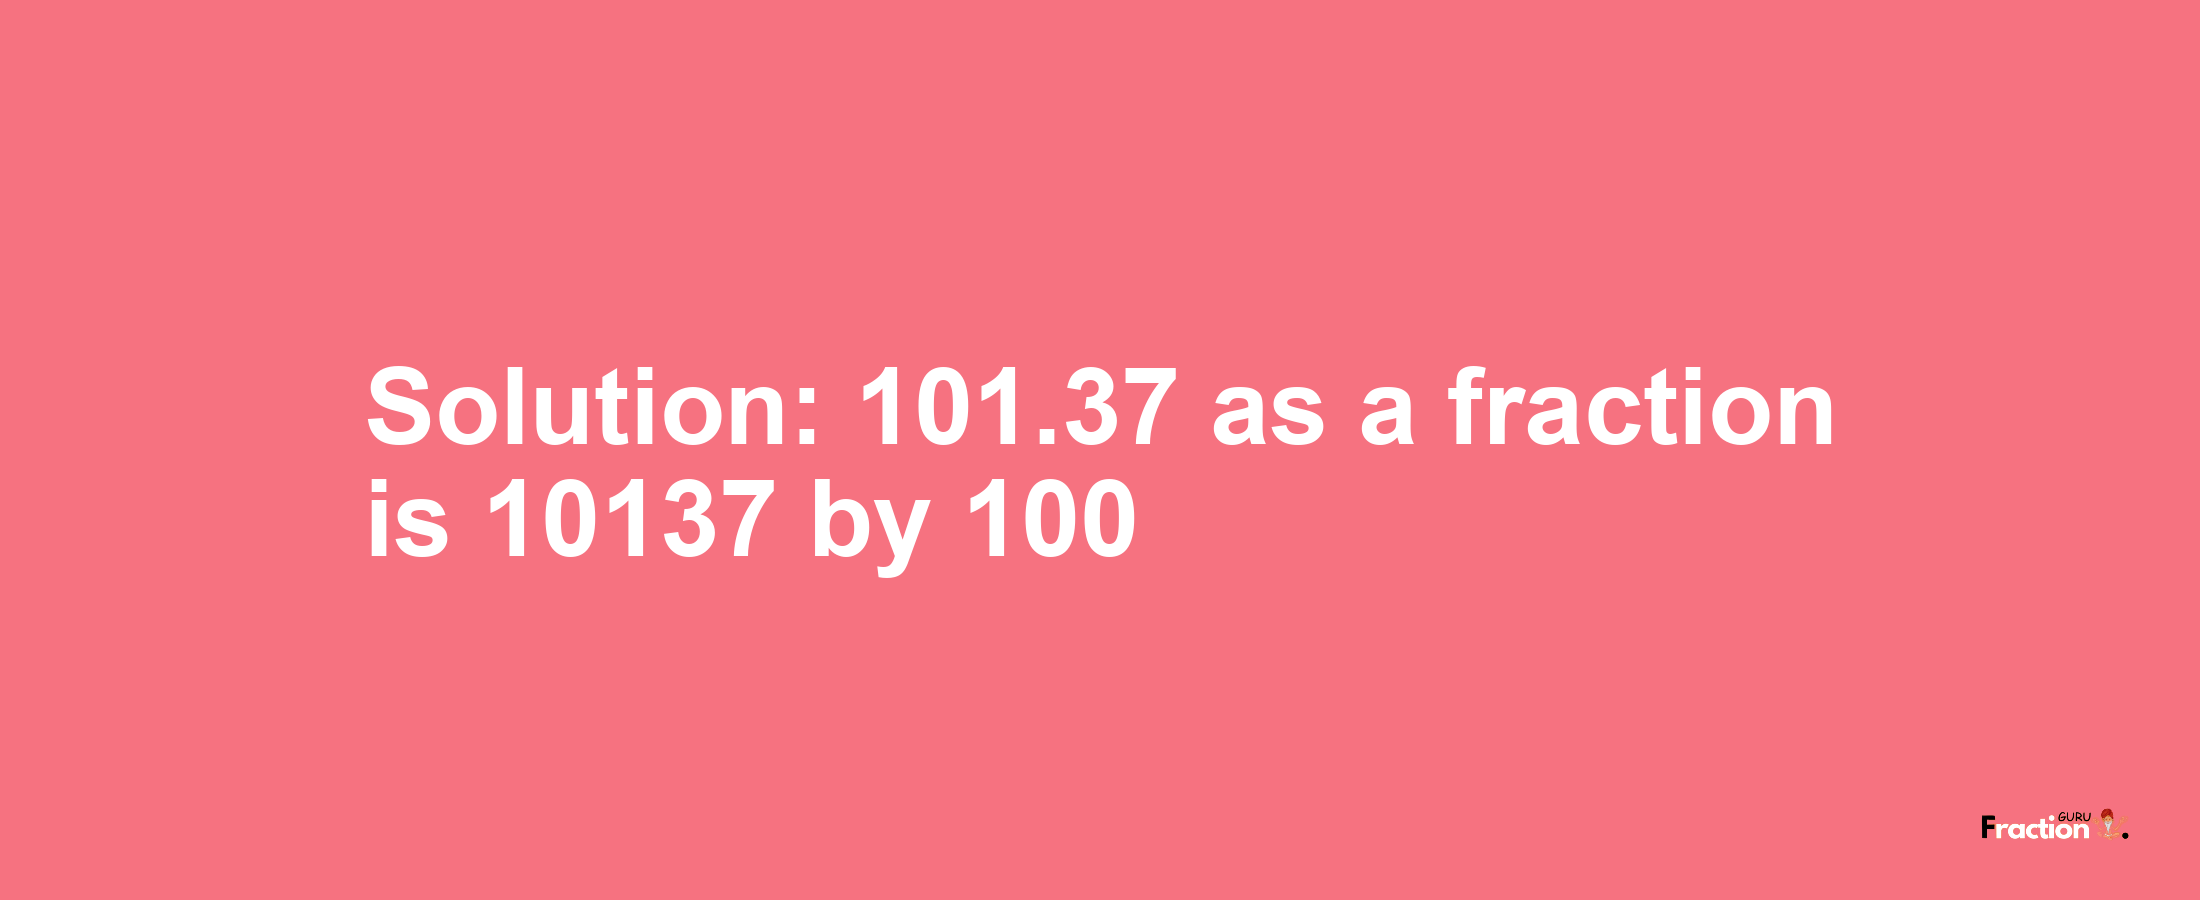 Solution:101.37 as a fraction is 10137/100